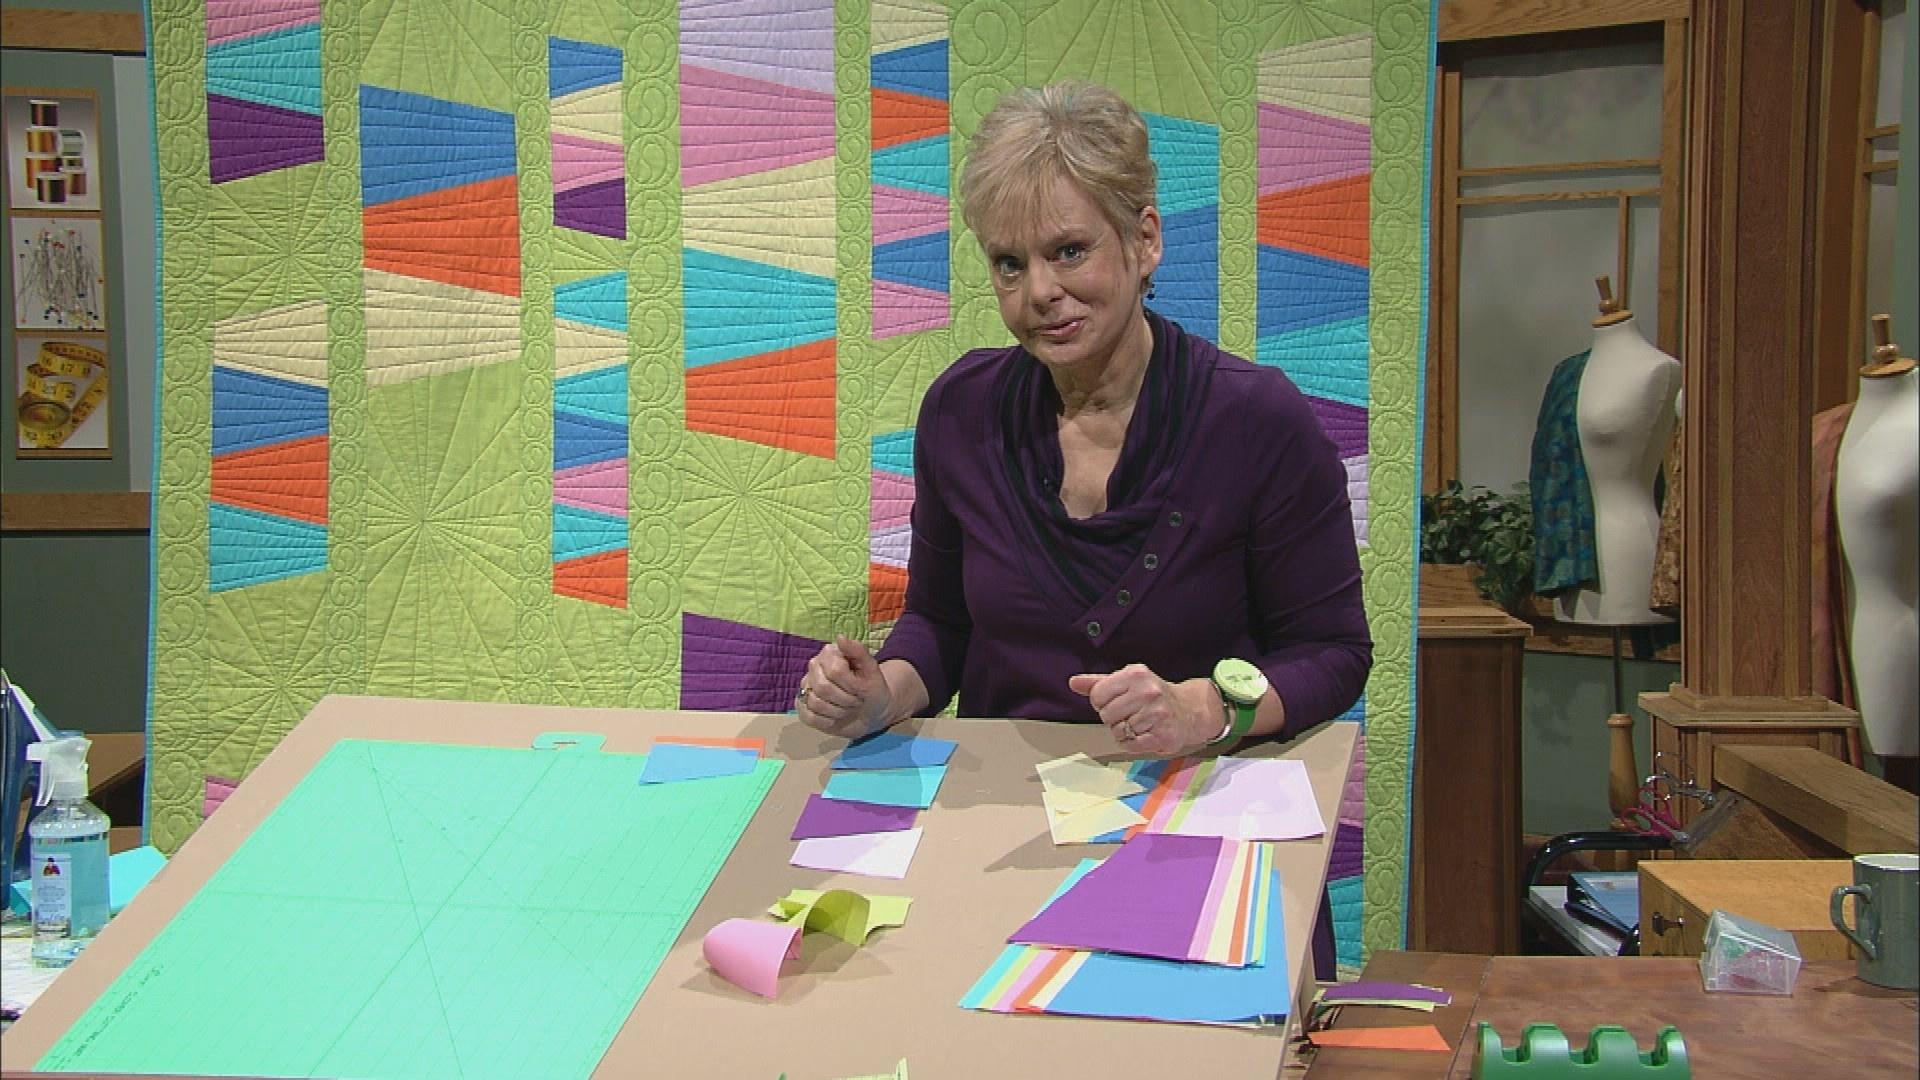 Pbs strip quilting sewing shows